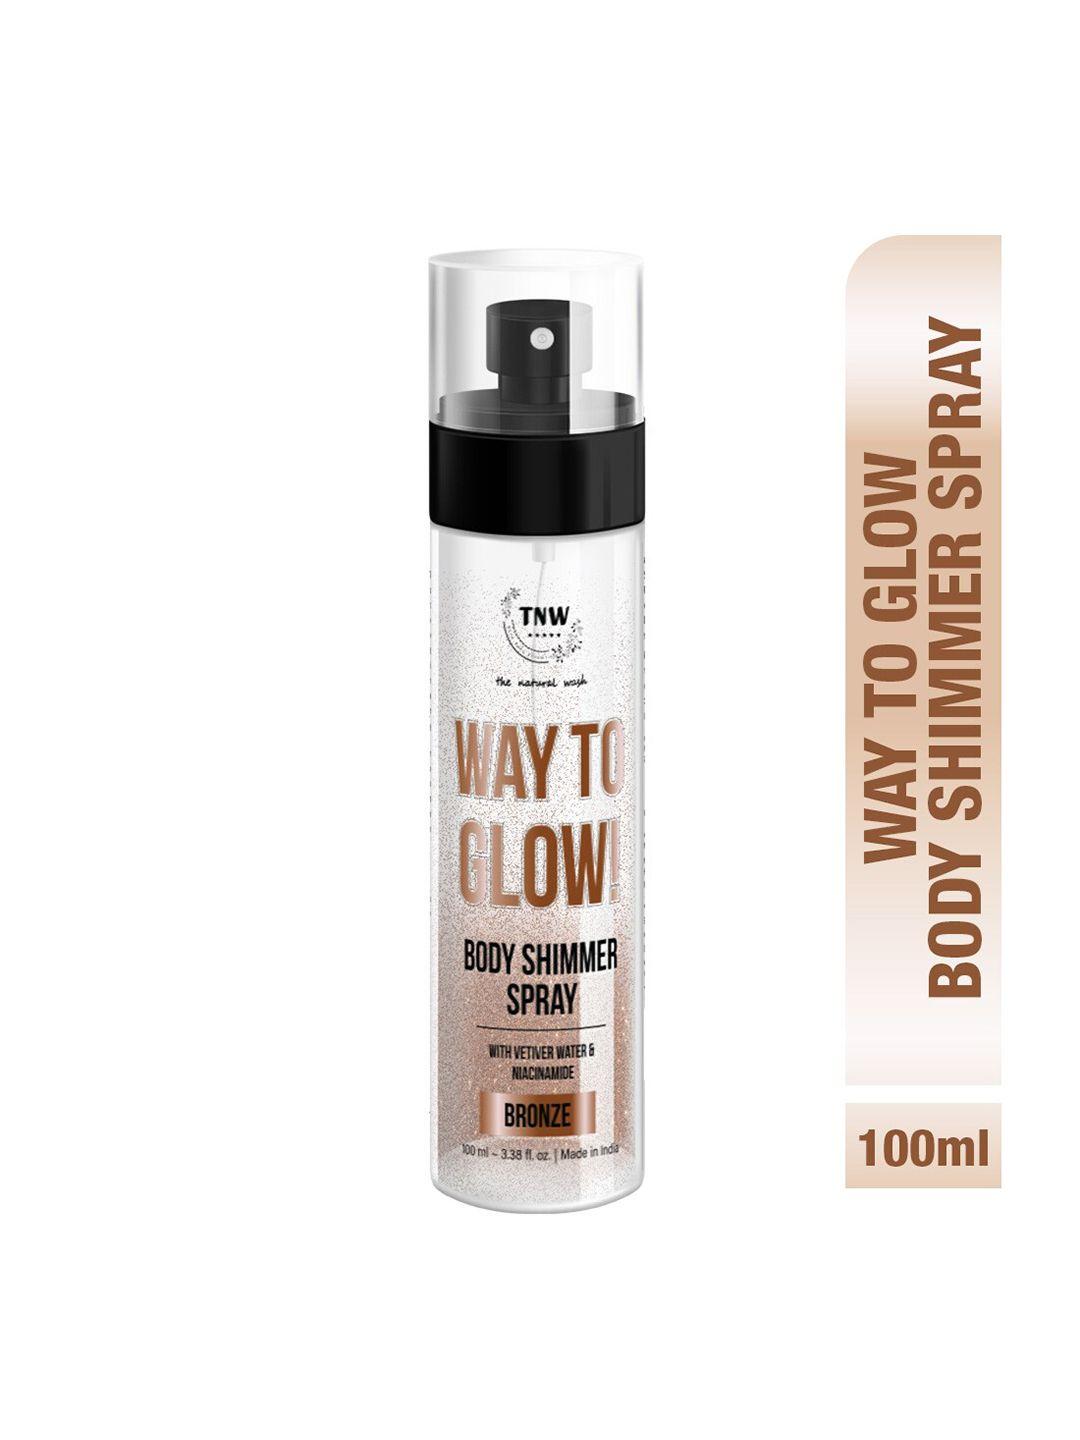 tnw the natural wash way to glow body shimmer spray 120 ml - bronze